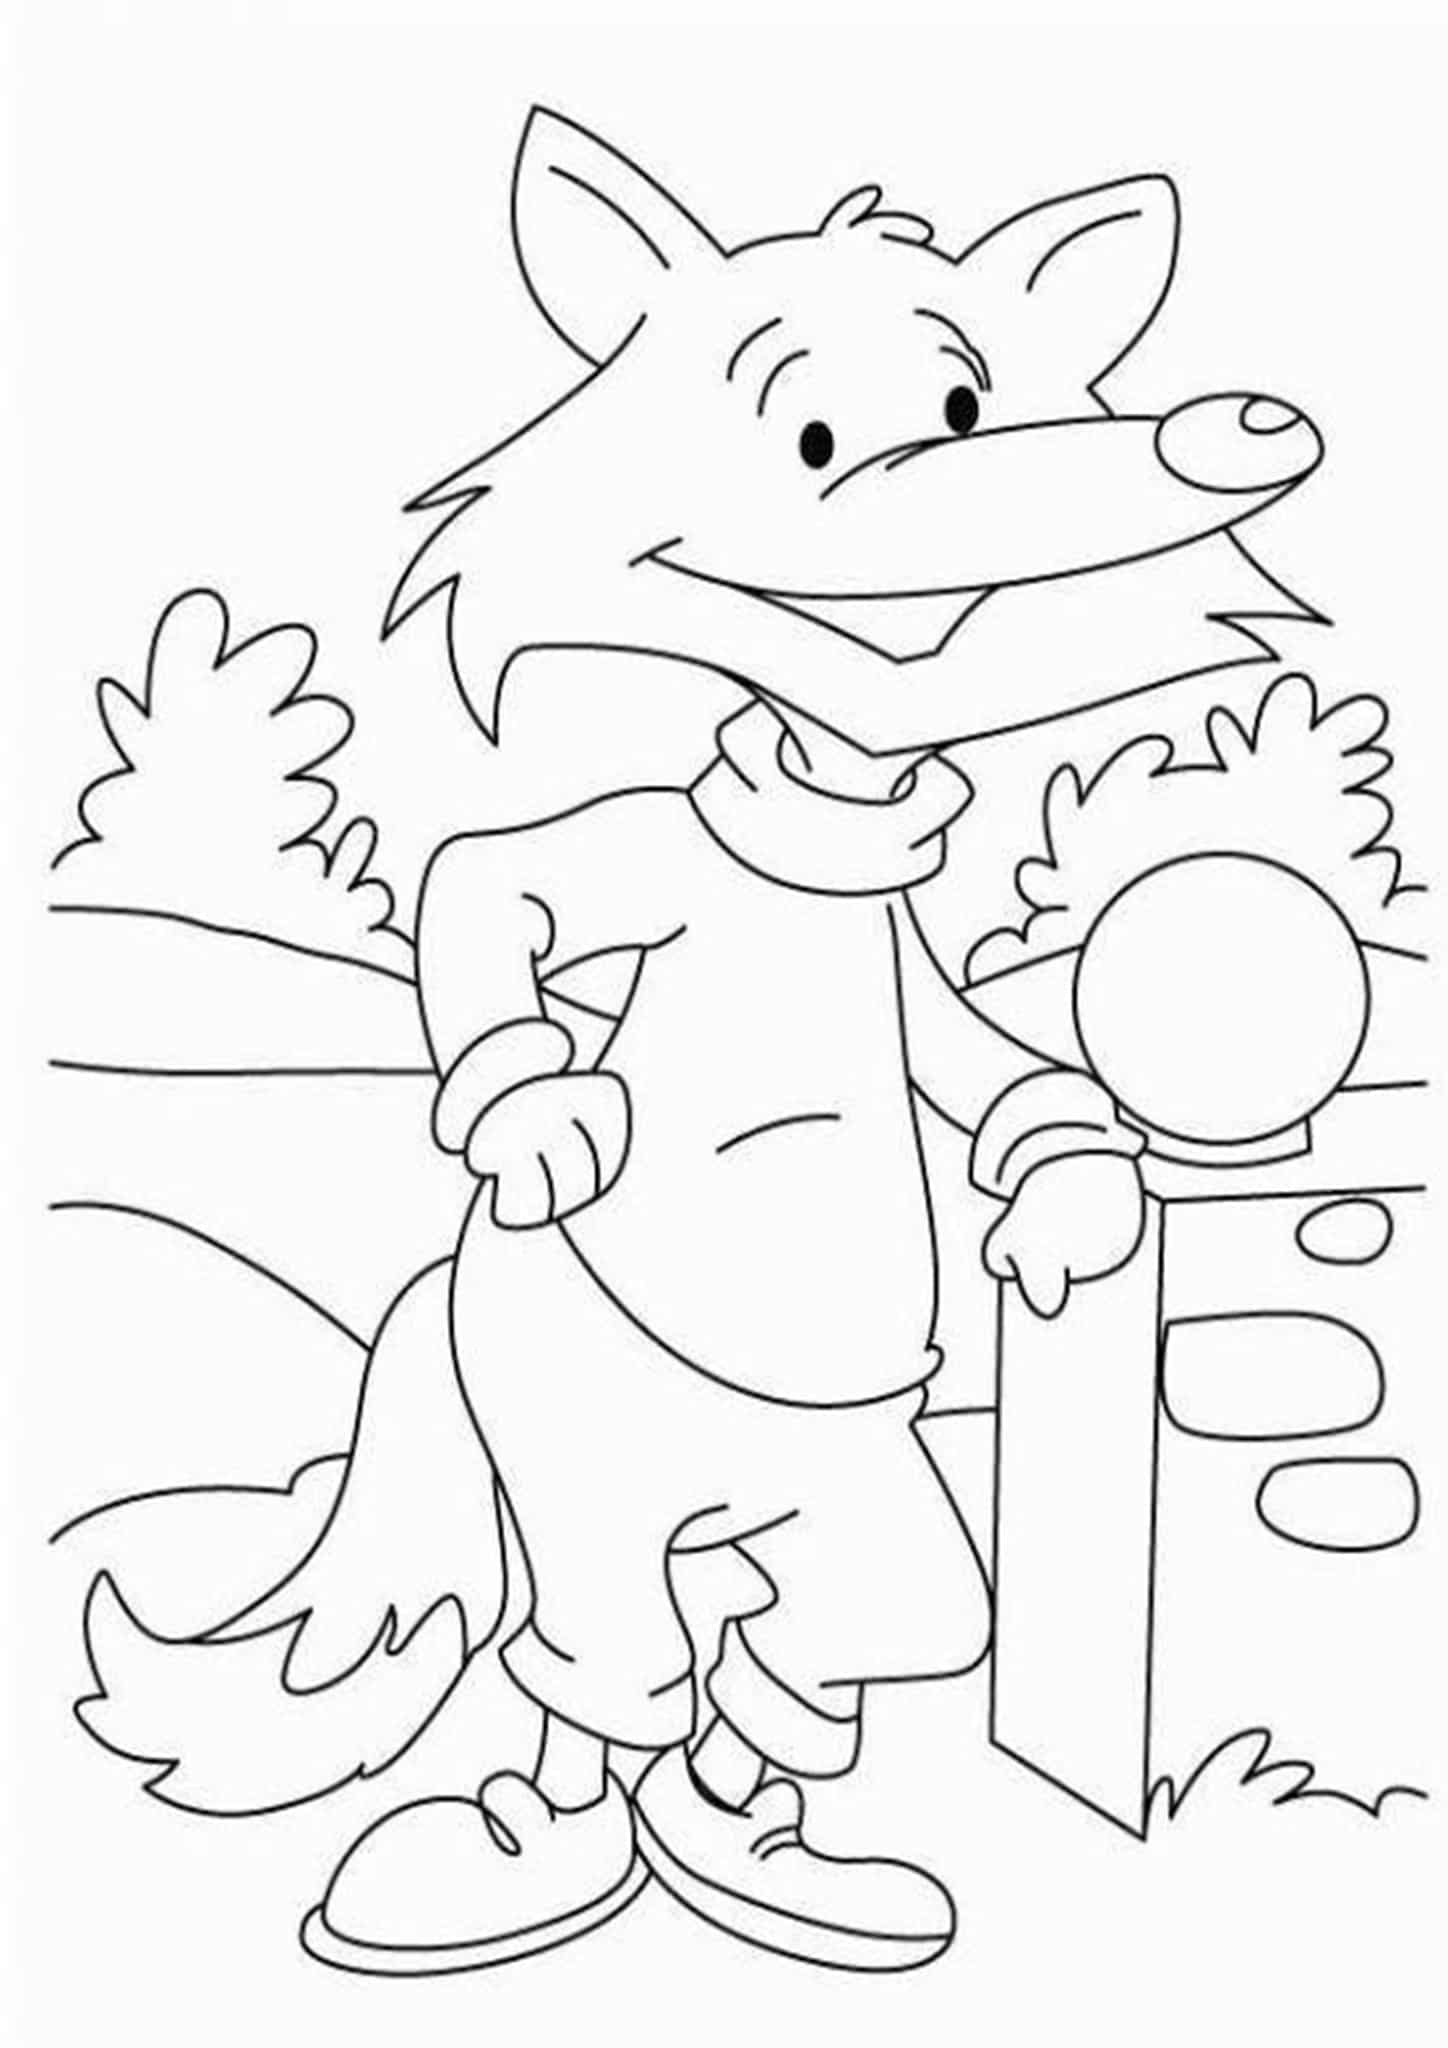 Download Free & Easy To Print Fox Coloring Pages - Tulamama